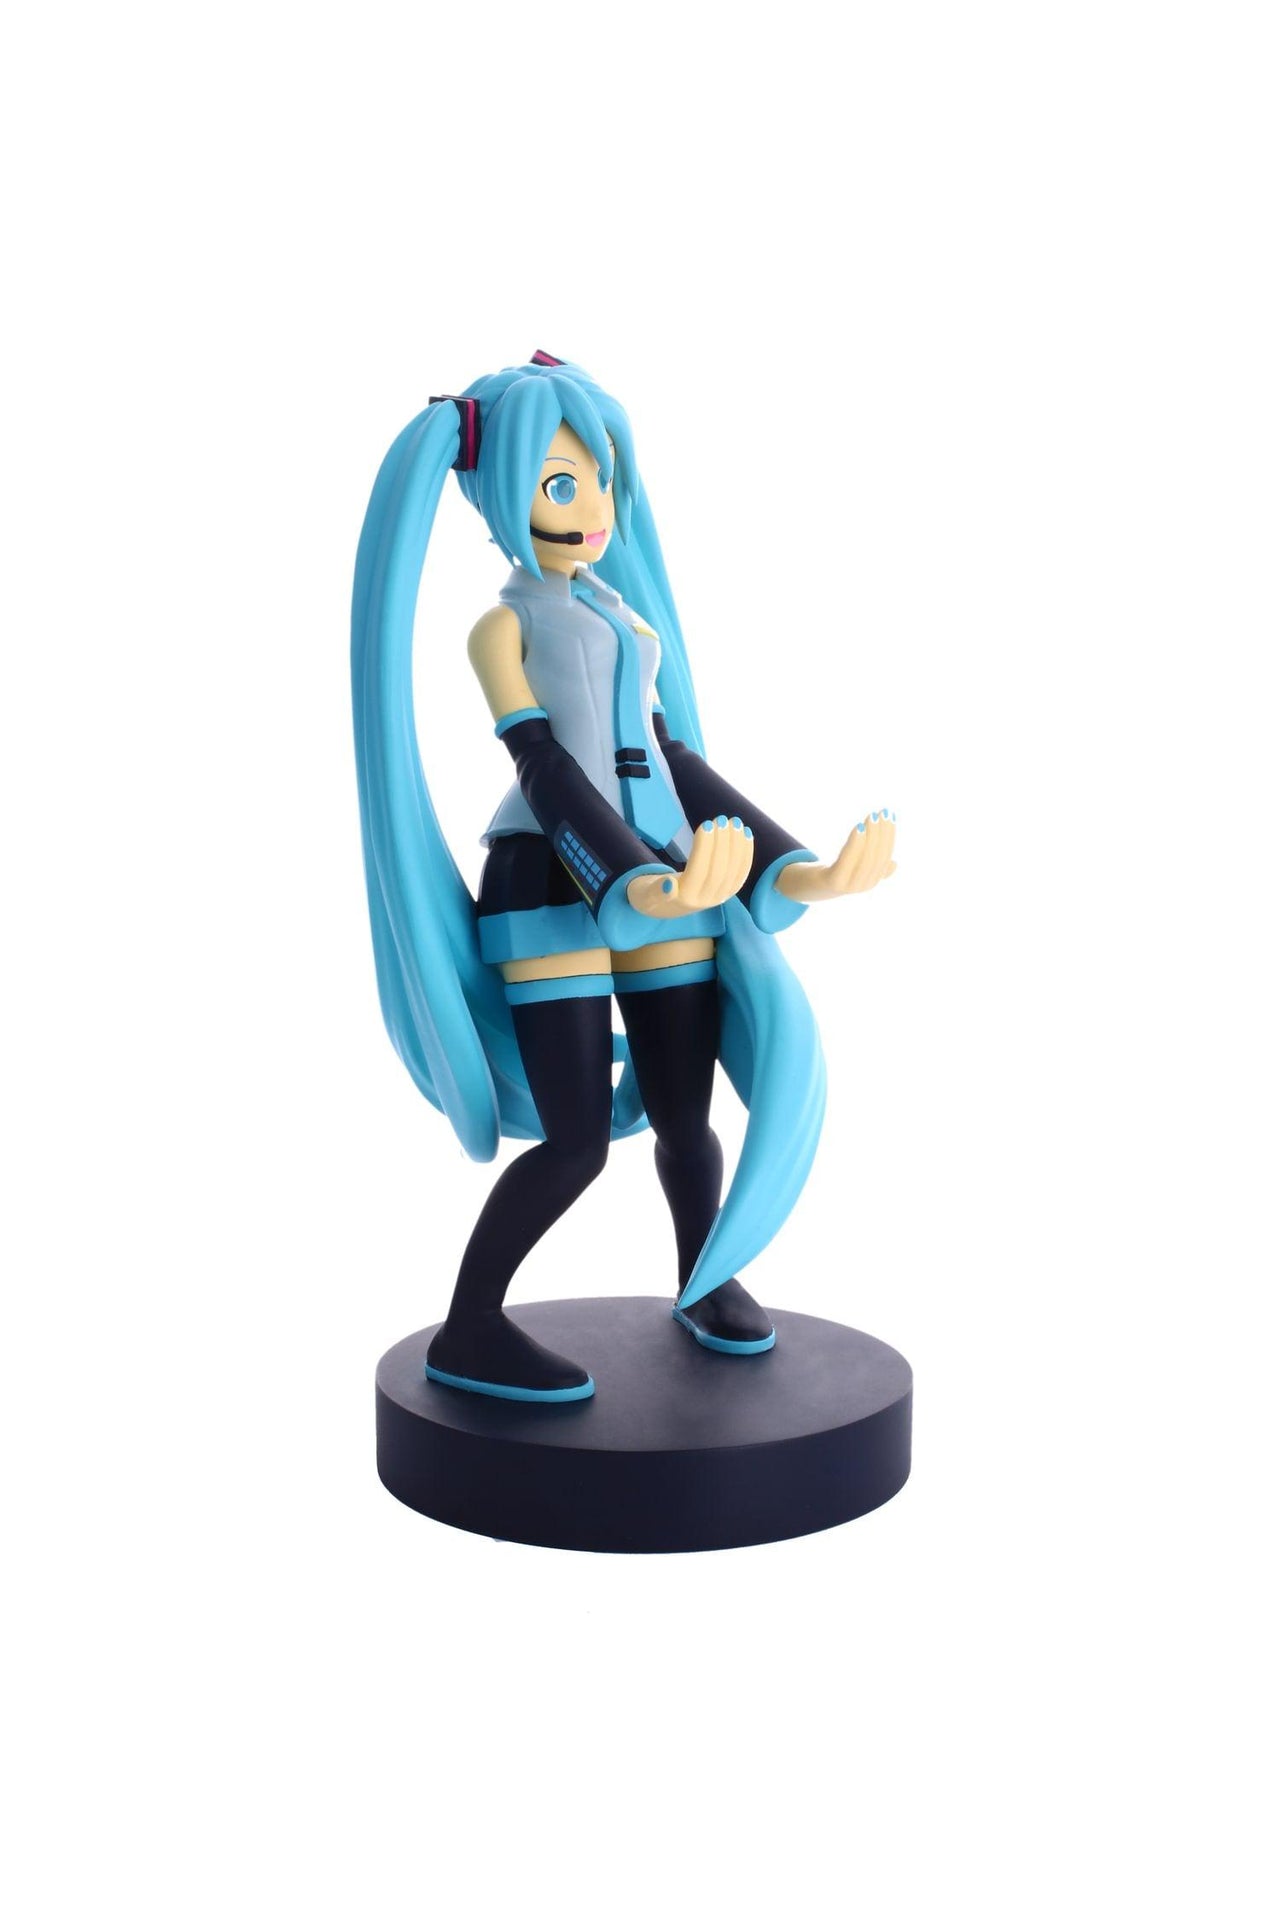 Hatsune Miku Cable Guys Phone & Controller Holder